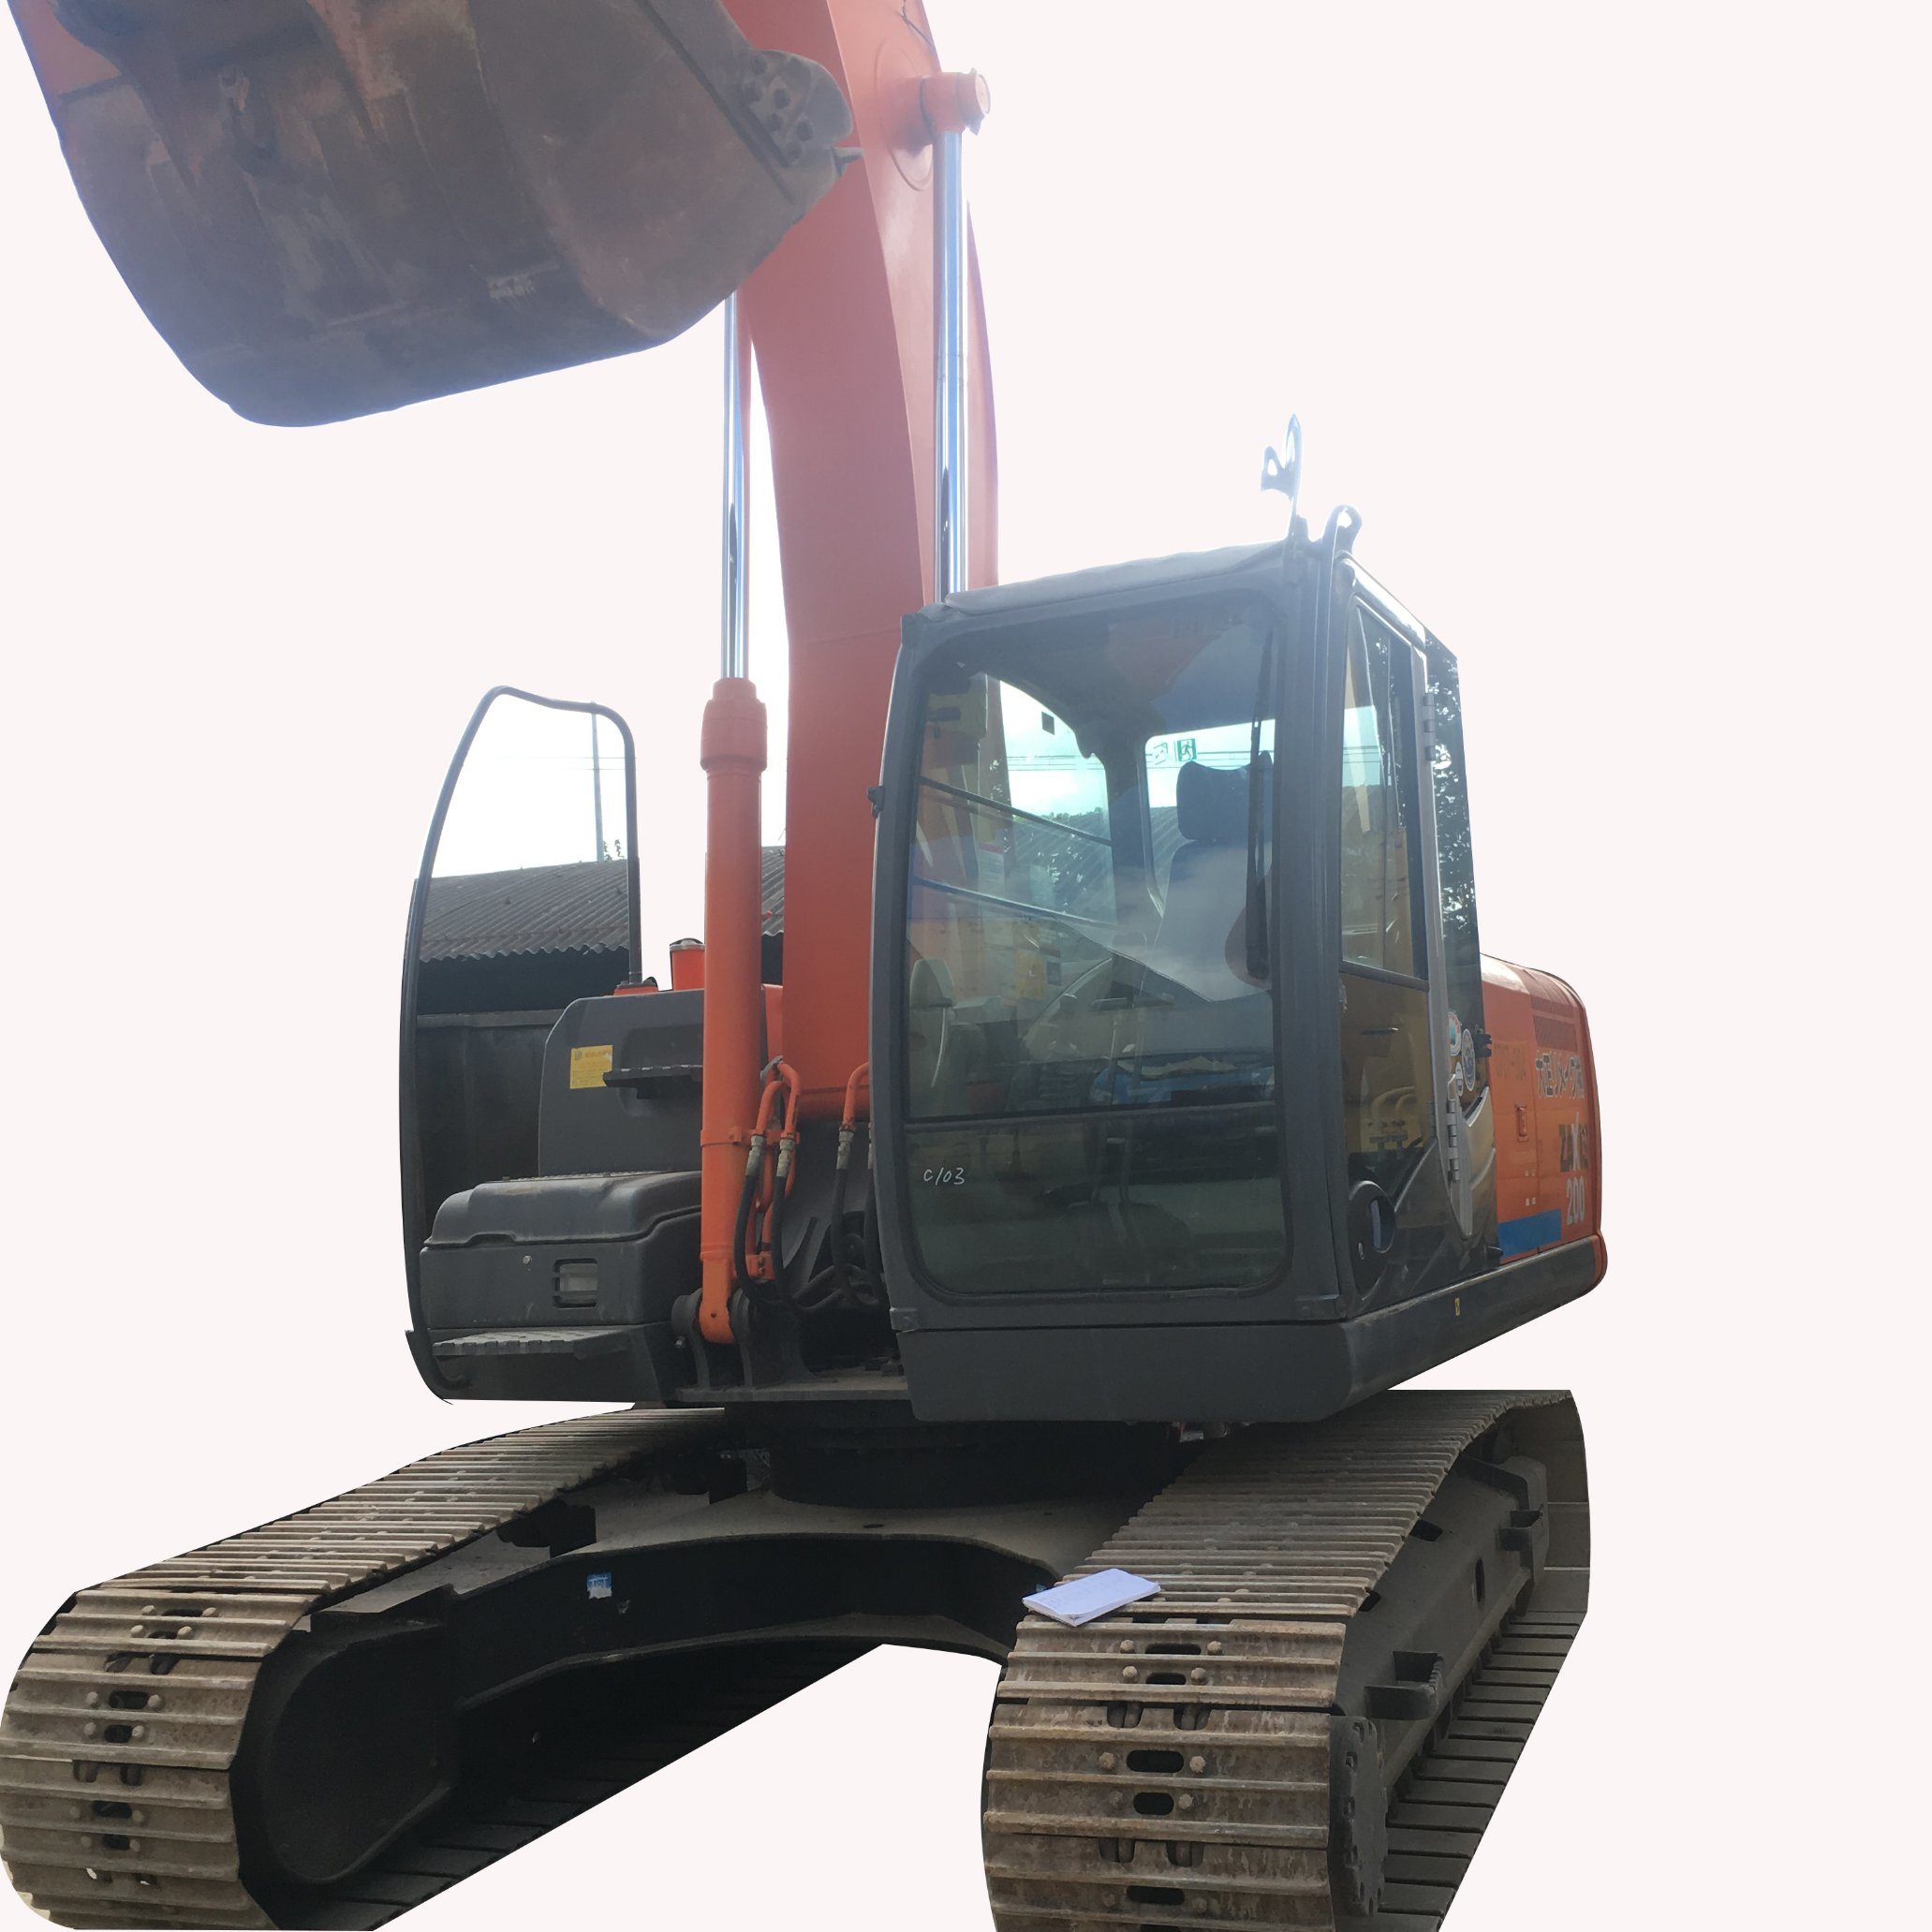 Used Excavator Hitachi 200 in Good Condition for Sale